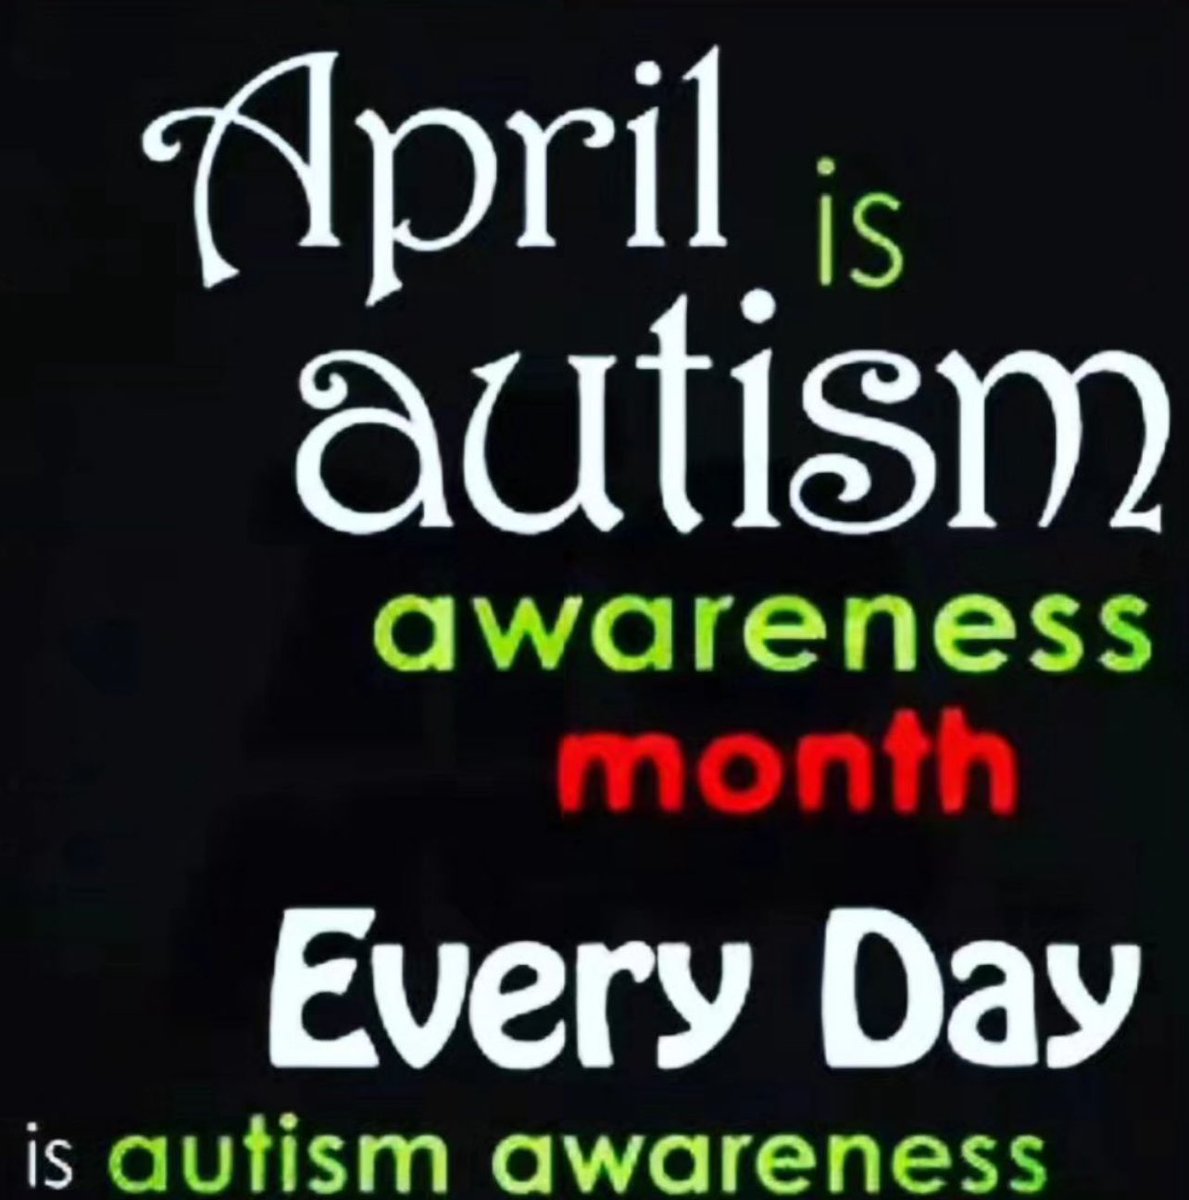 We Celebrate Autism Awareness and support our youth on a daily basis! Spread the word and let’s become autism literate together! #Autism #AutismAwareness #onefamily @principal_costa #stonemountainhighschool #exceptionaleducation